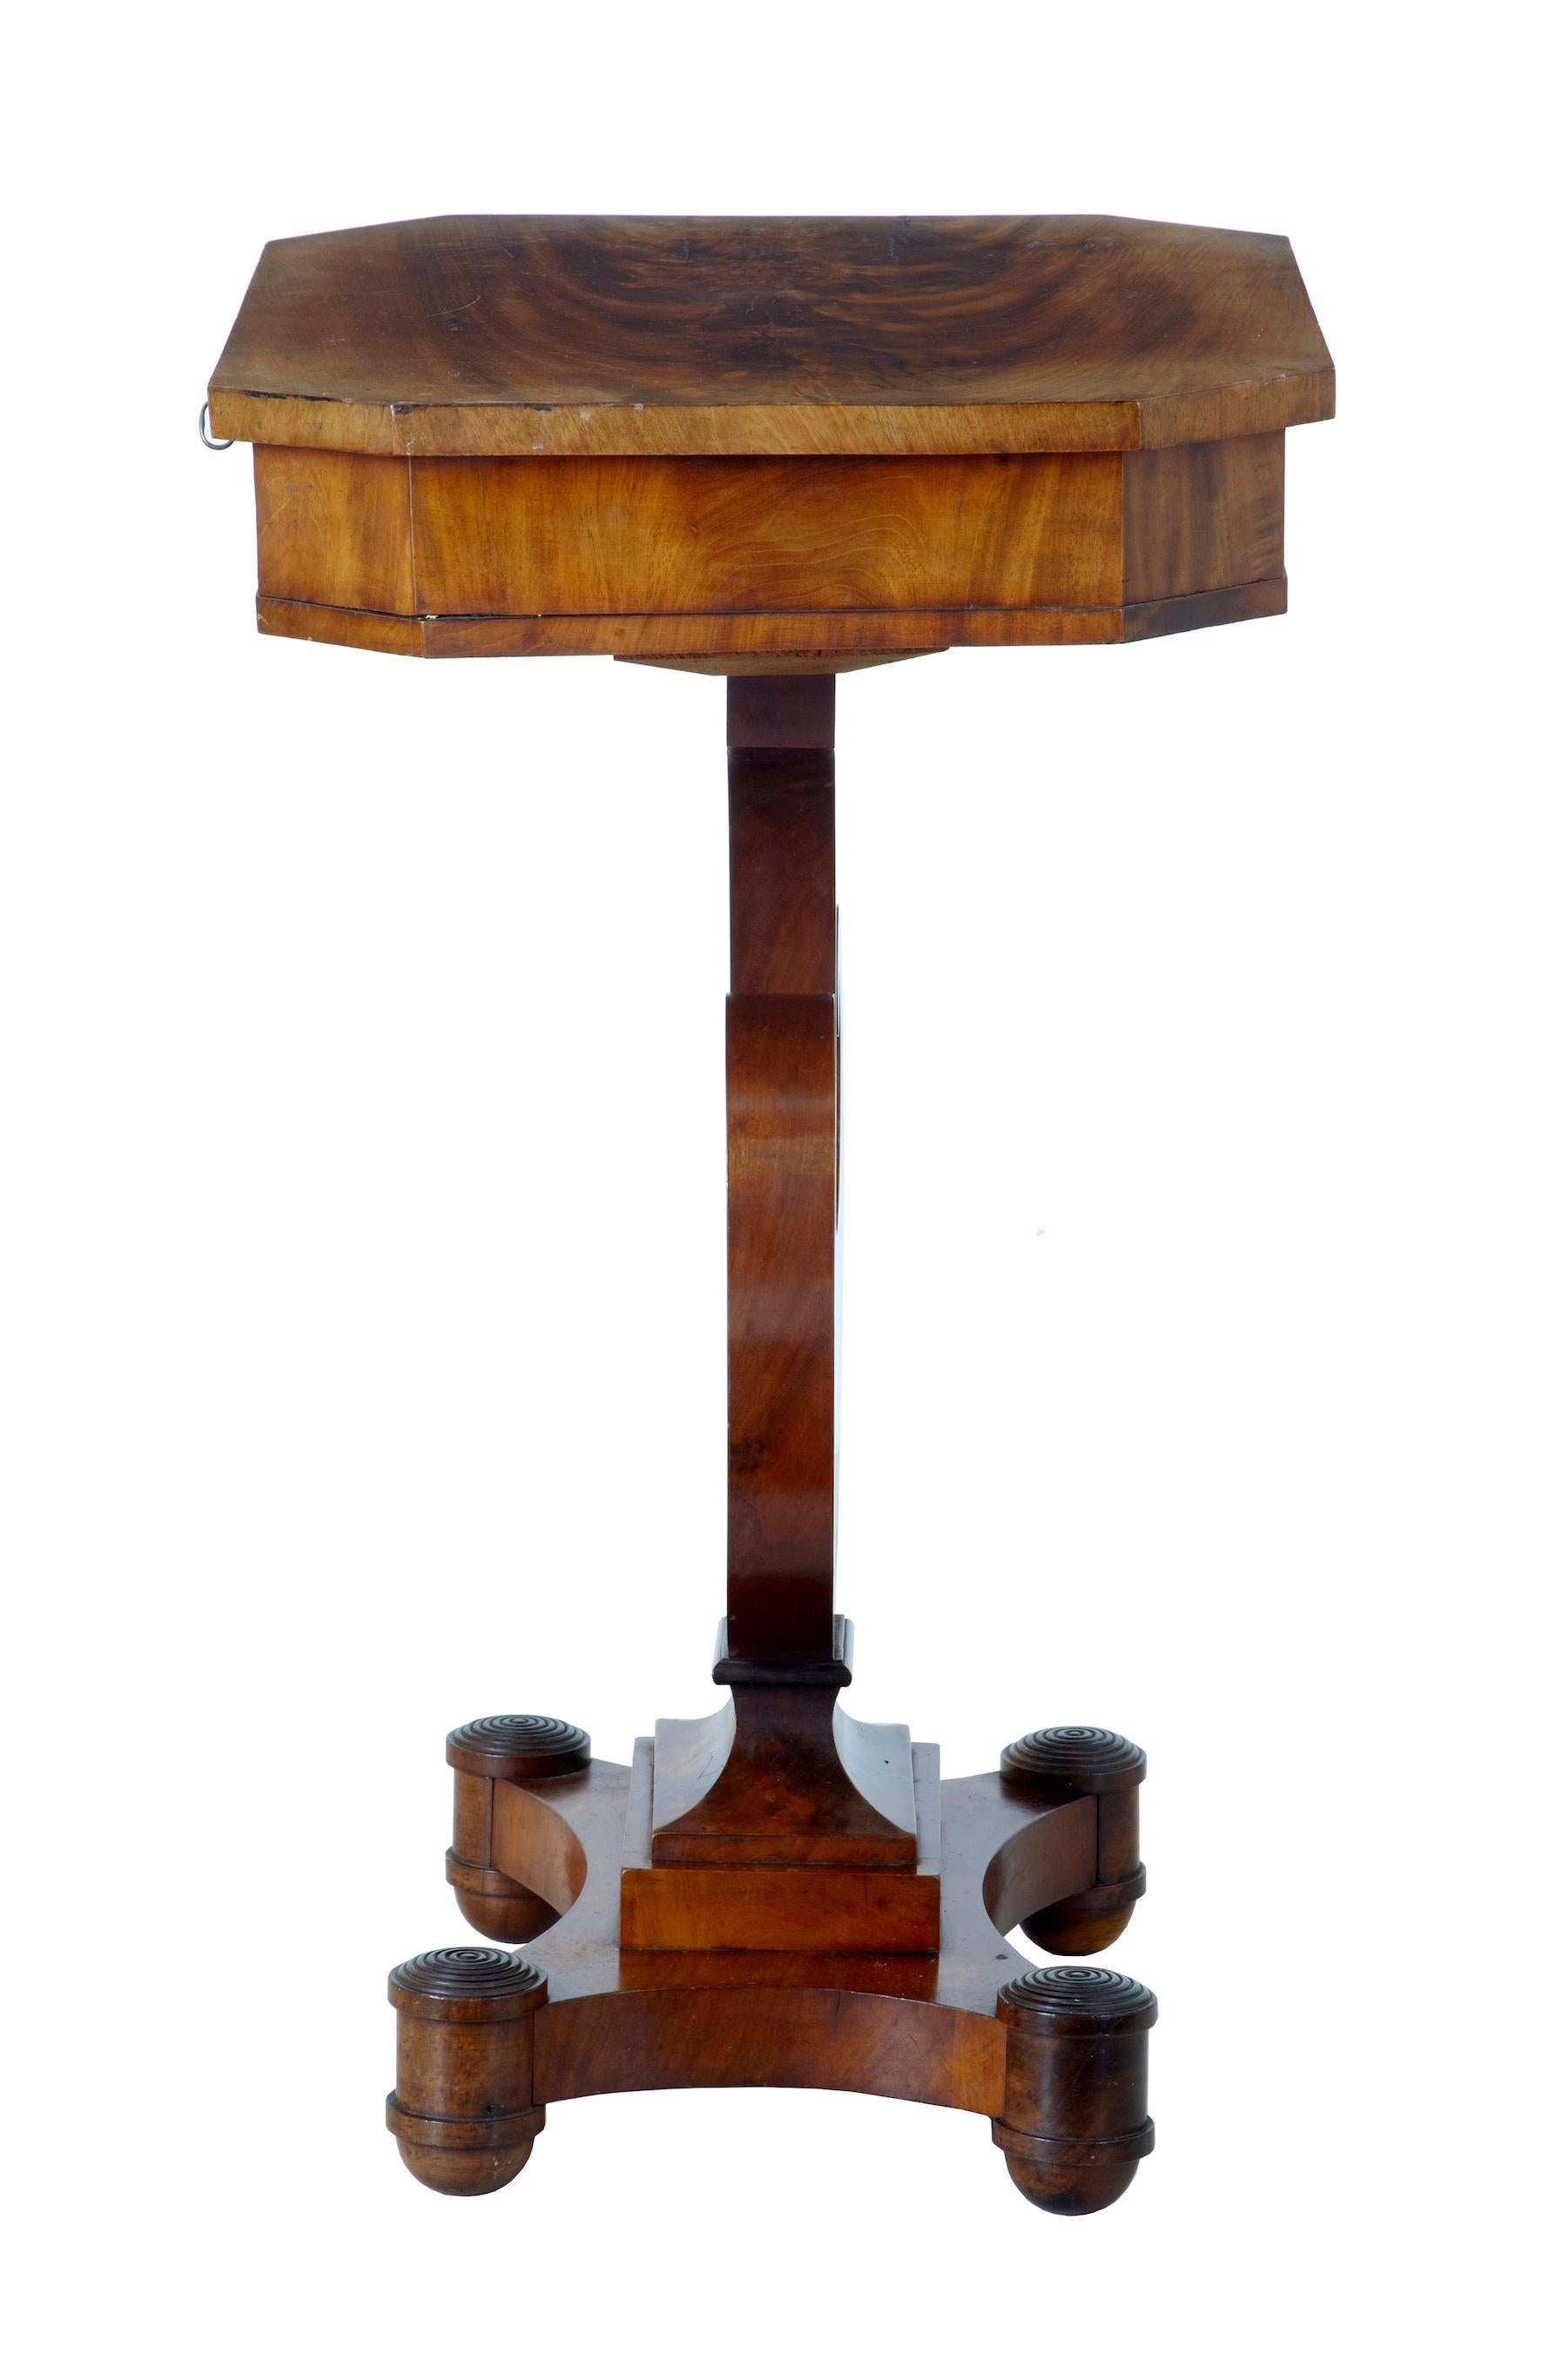 Fine quality 19th century mahogany work table,
circa 1860.
Shaped top with fitted drawer below and hinged pin cushion.
Lyre shaped base, standing on quadriform base with roundel decorations above the feet.